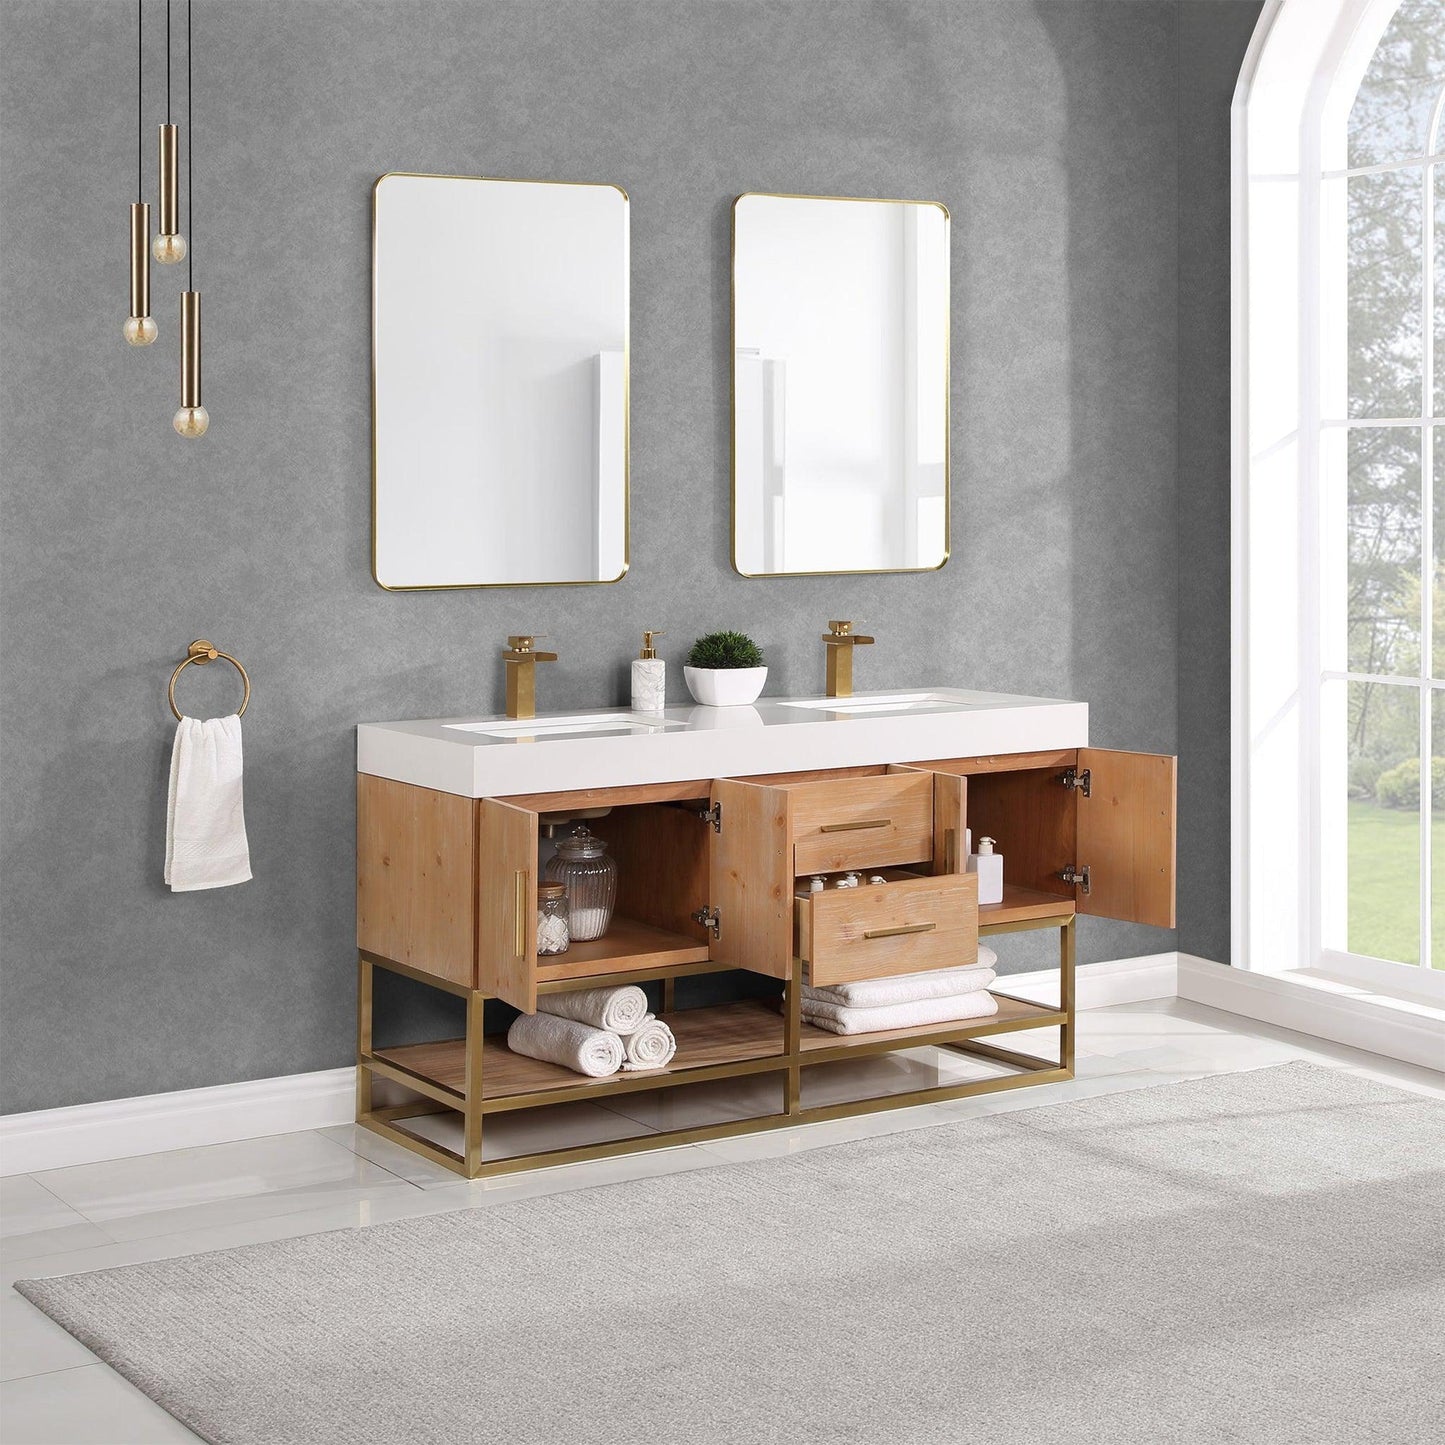 Altair Bianco 60" Light Brown Freestanding Double Bathroom Vanity Set With Brushed Gold Support Base, Mirror, White Composite Stone Top, Two Rectangular Undermount Ceramic Sinks, and Overflow